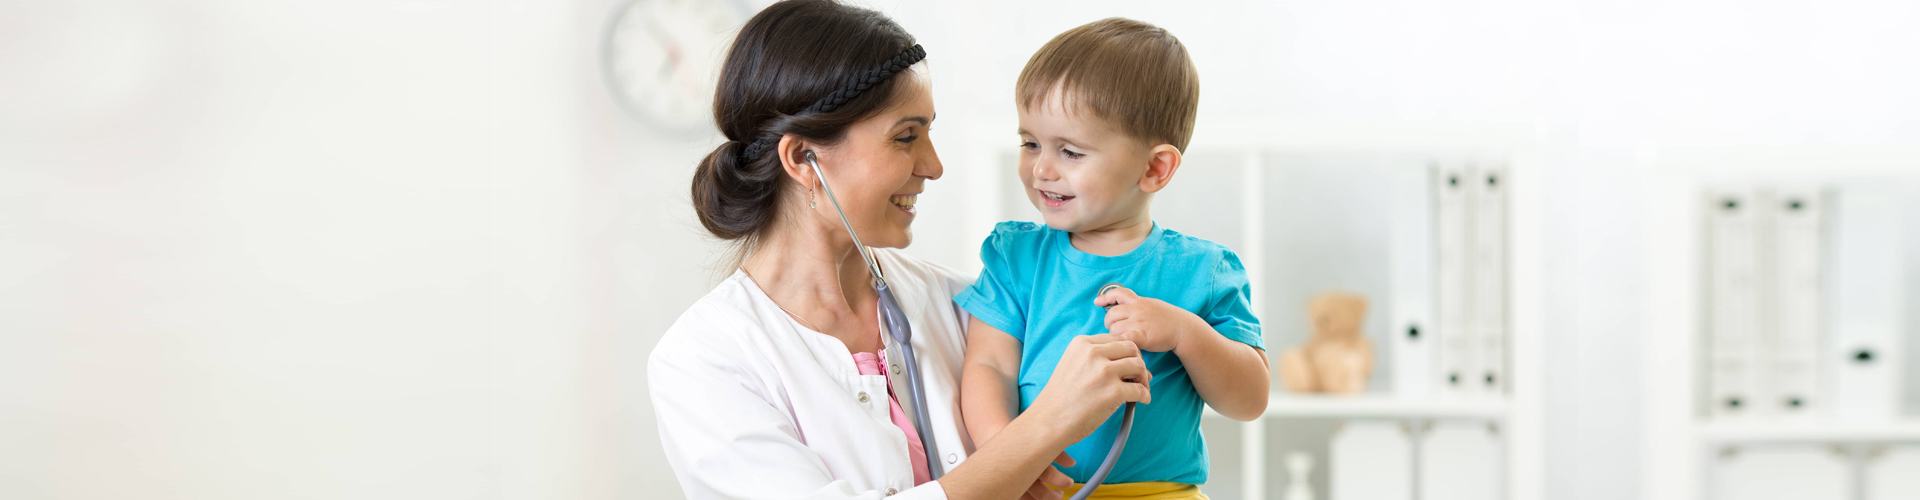 a pediatrician and a child smiling at each other